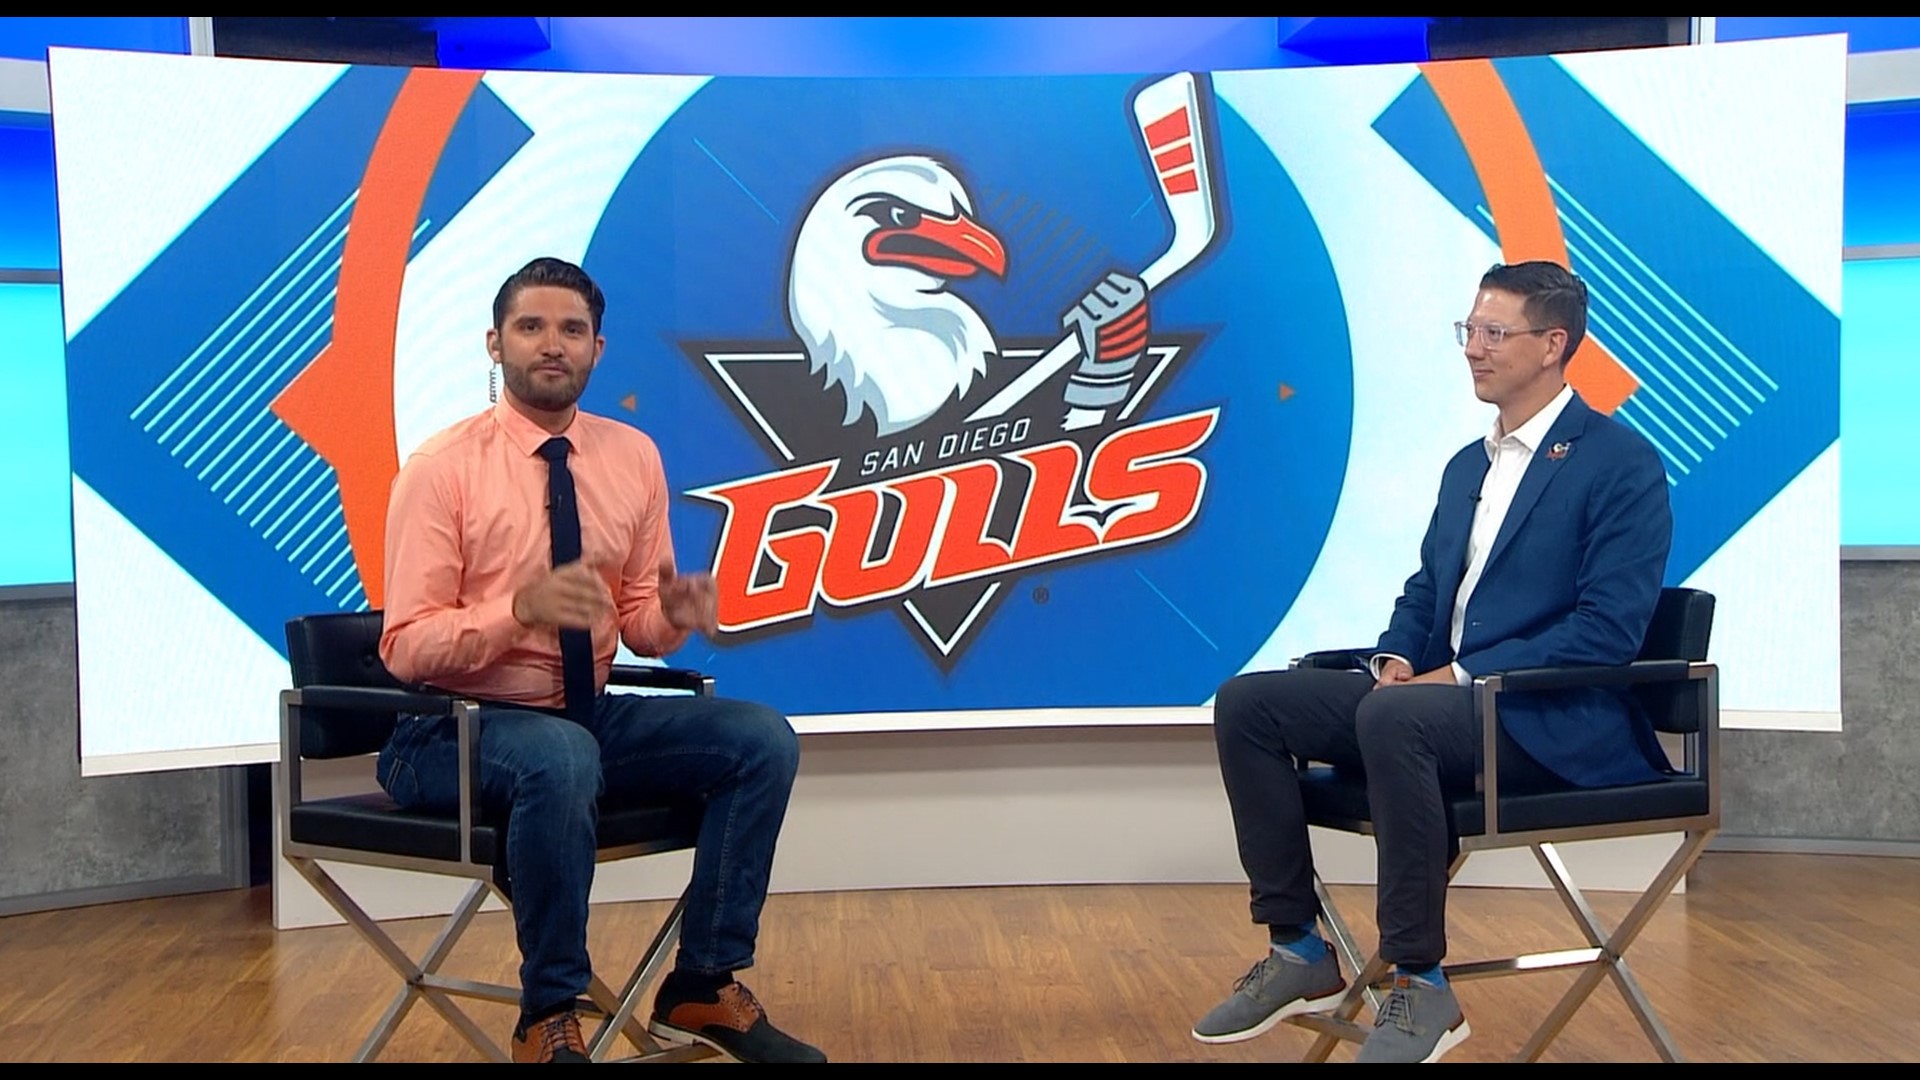 The San Diego Gulls are getting set for a new season with a lot of changes including a new head coach and team broadcaster.